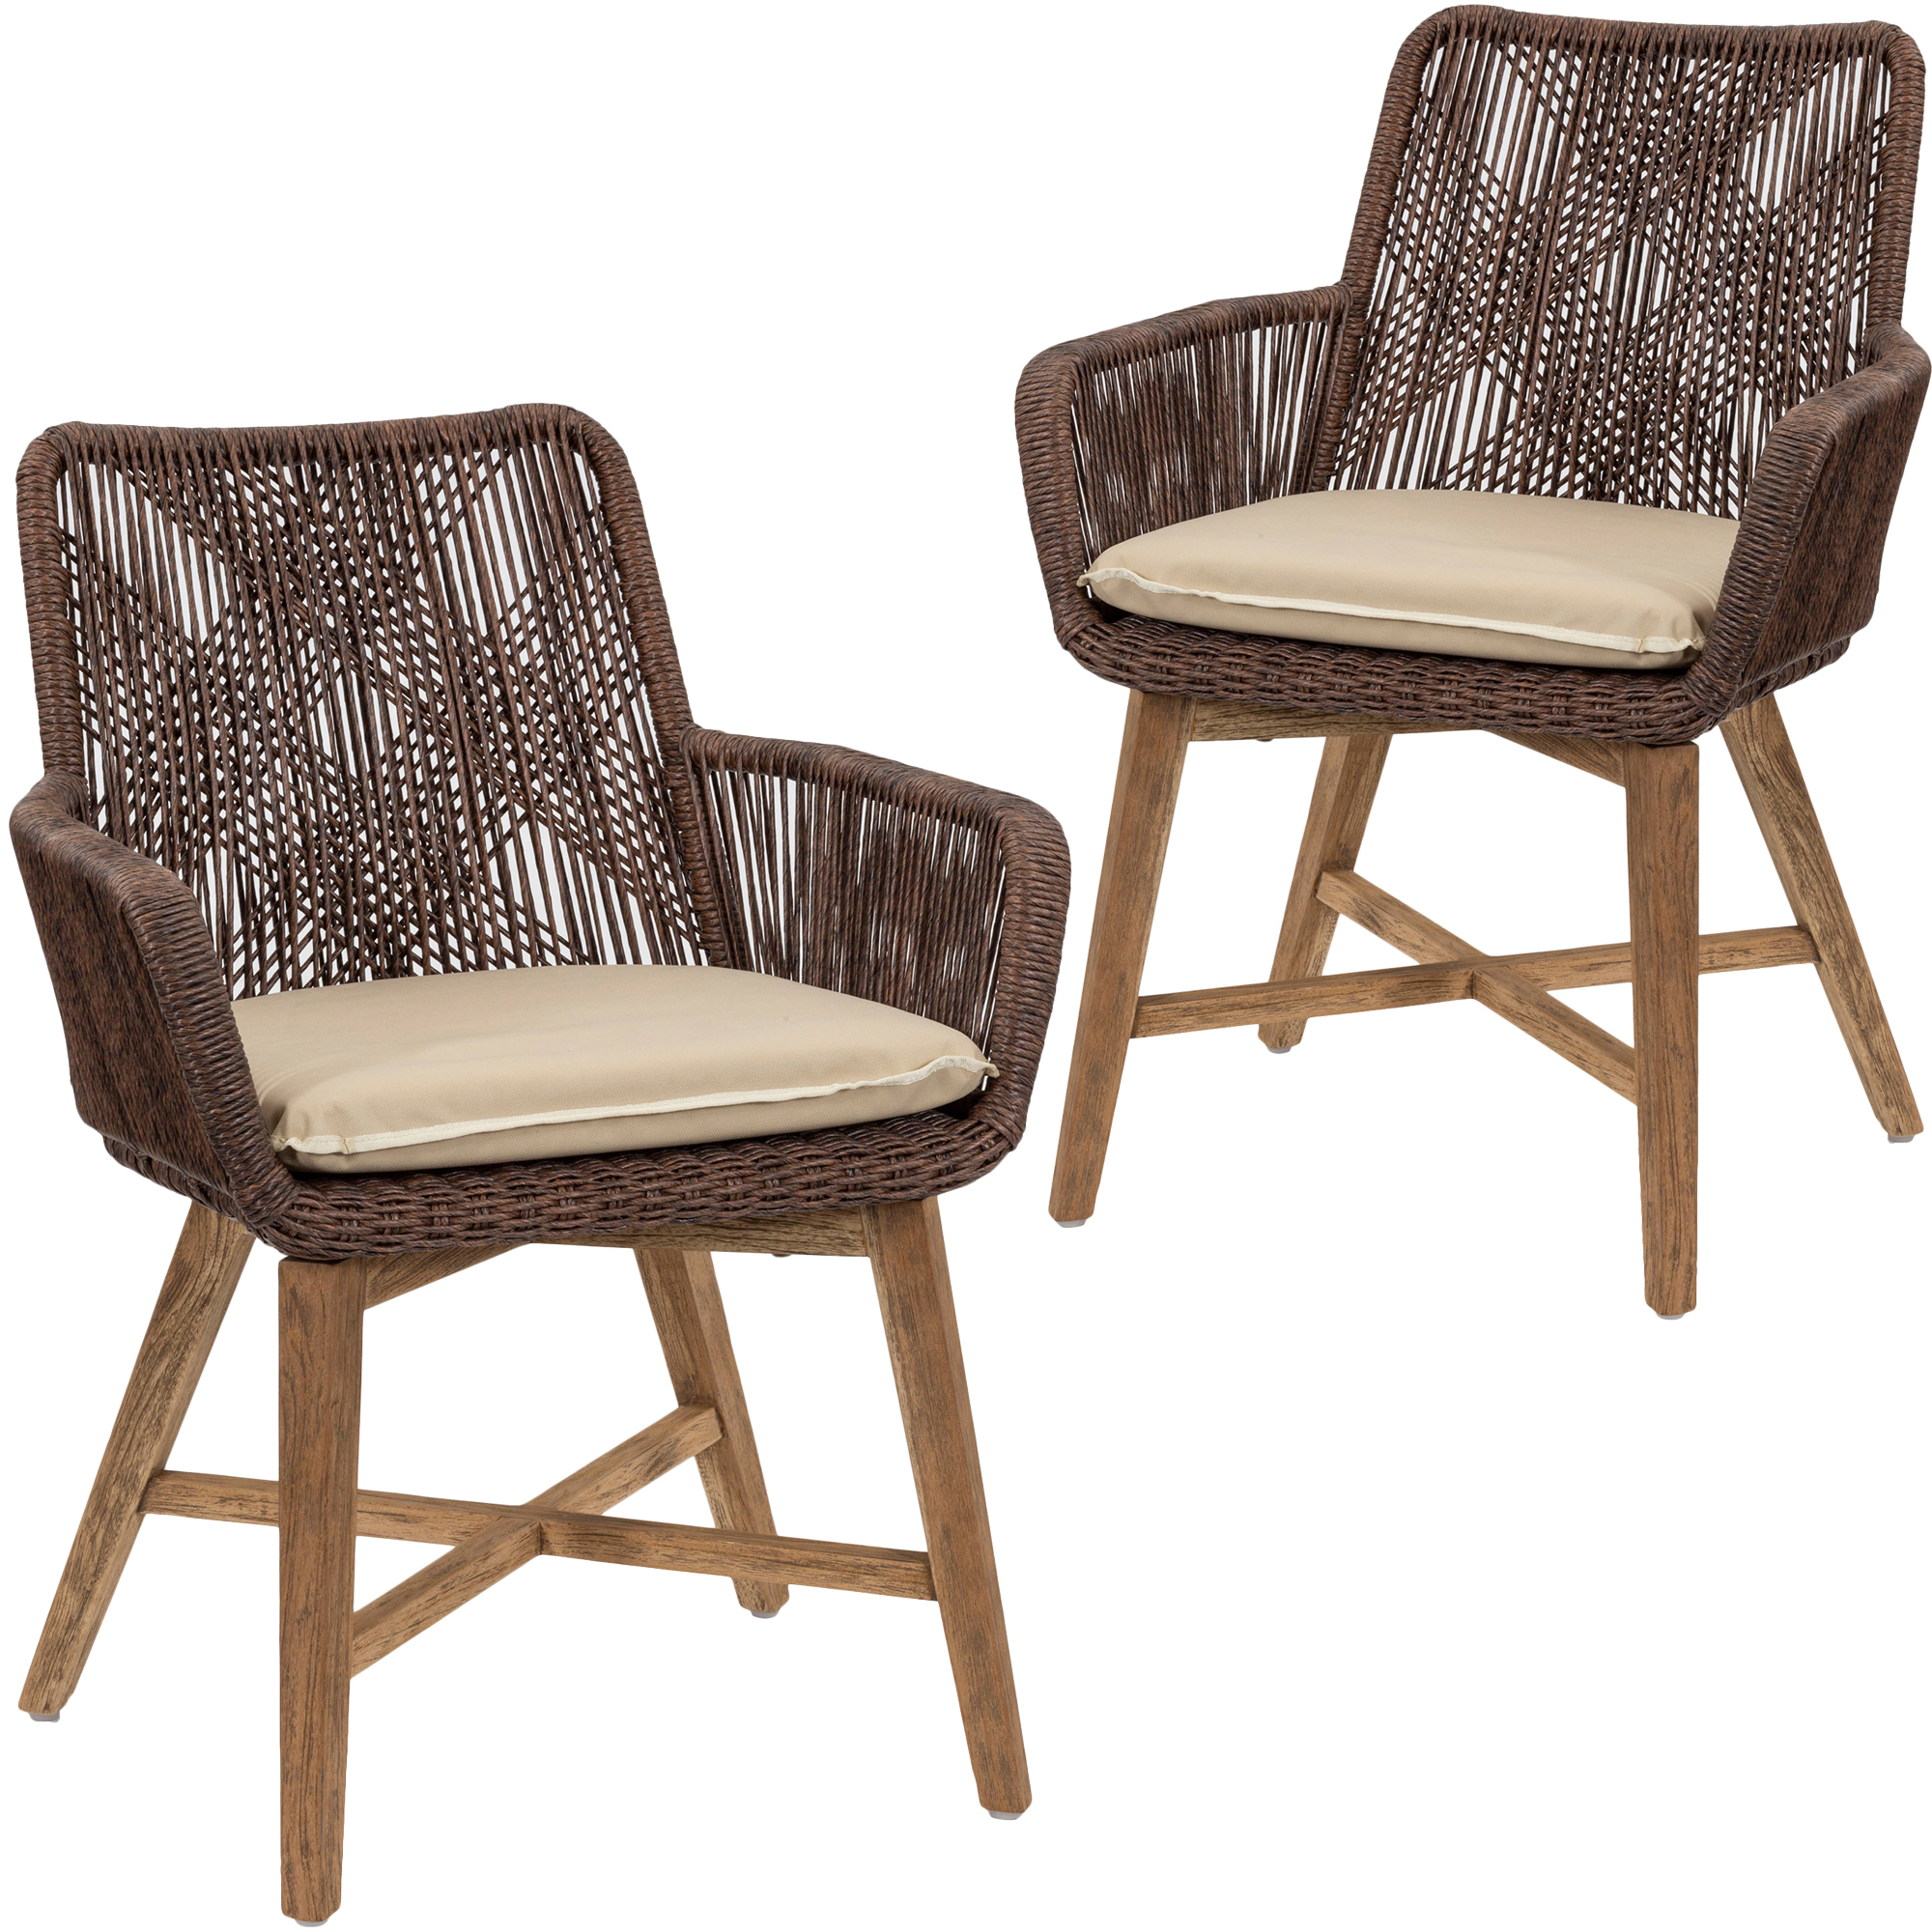 Wicker Outdoor Dining Chairs Australia ~ Marvelous House